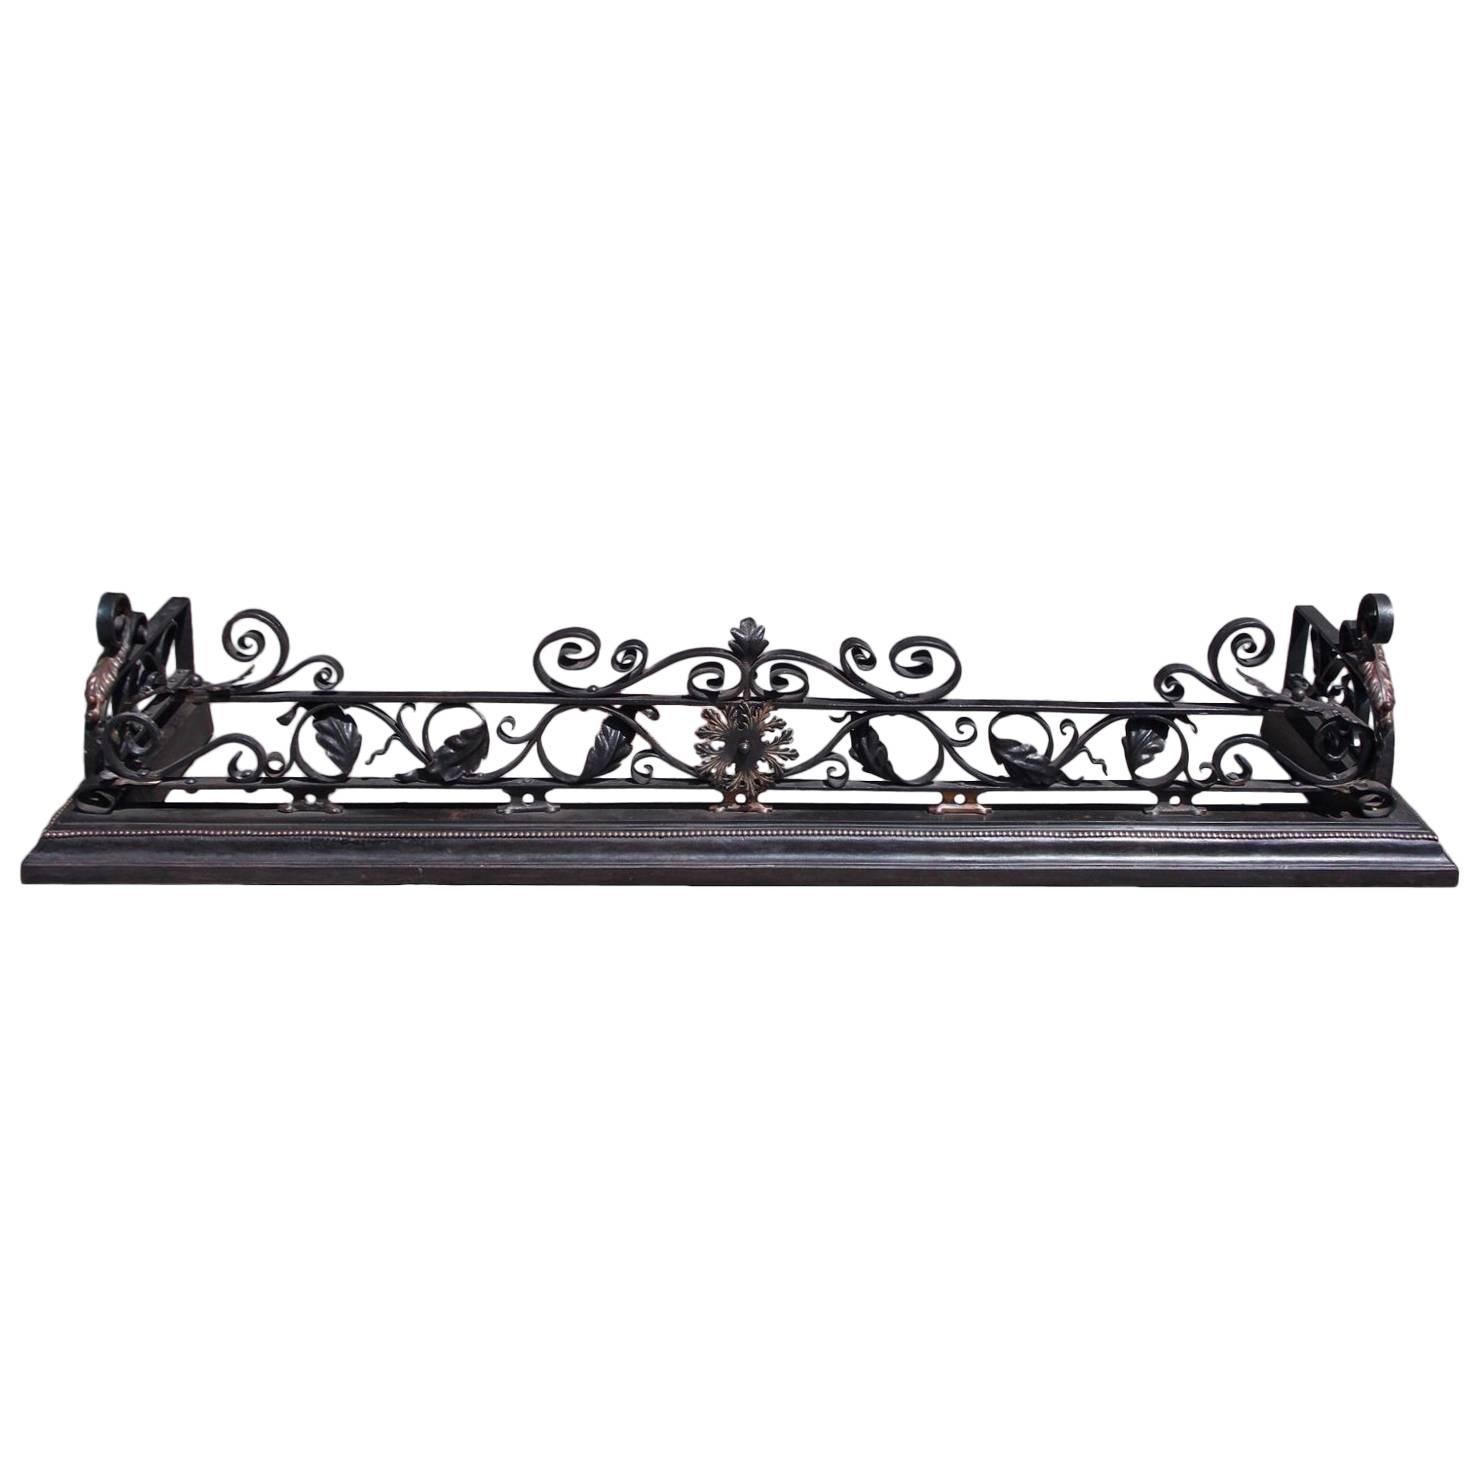 English Cast Iron and Copper Acanthus Leaf Fire Place Fender, Circa 1830